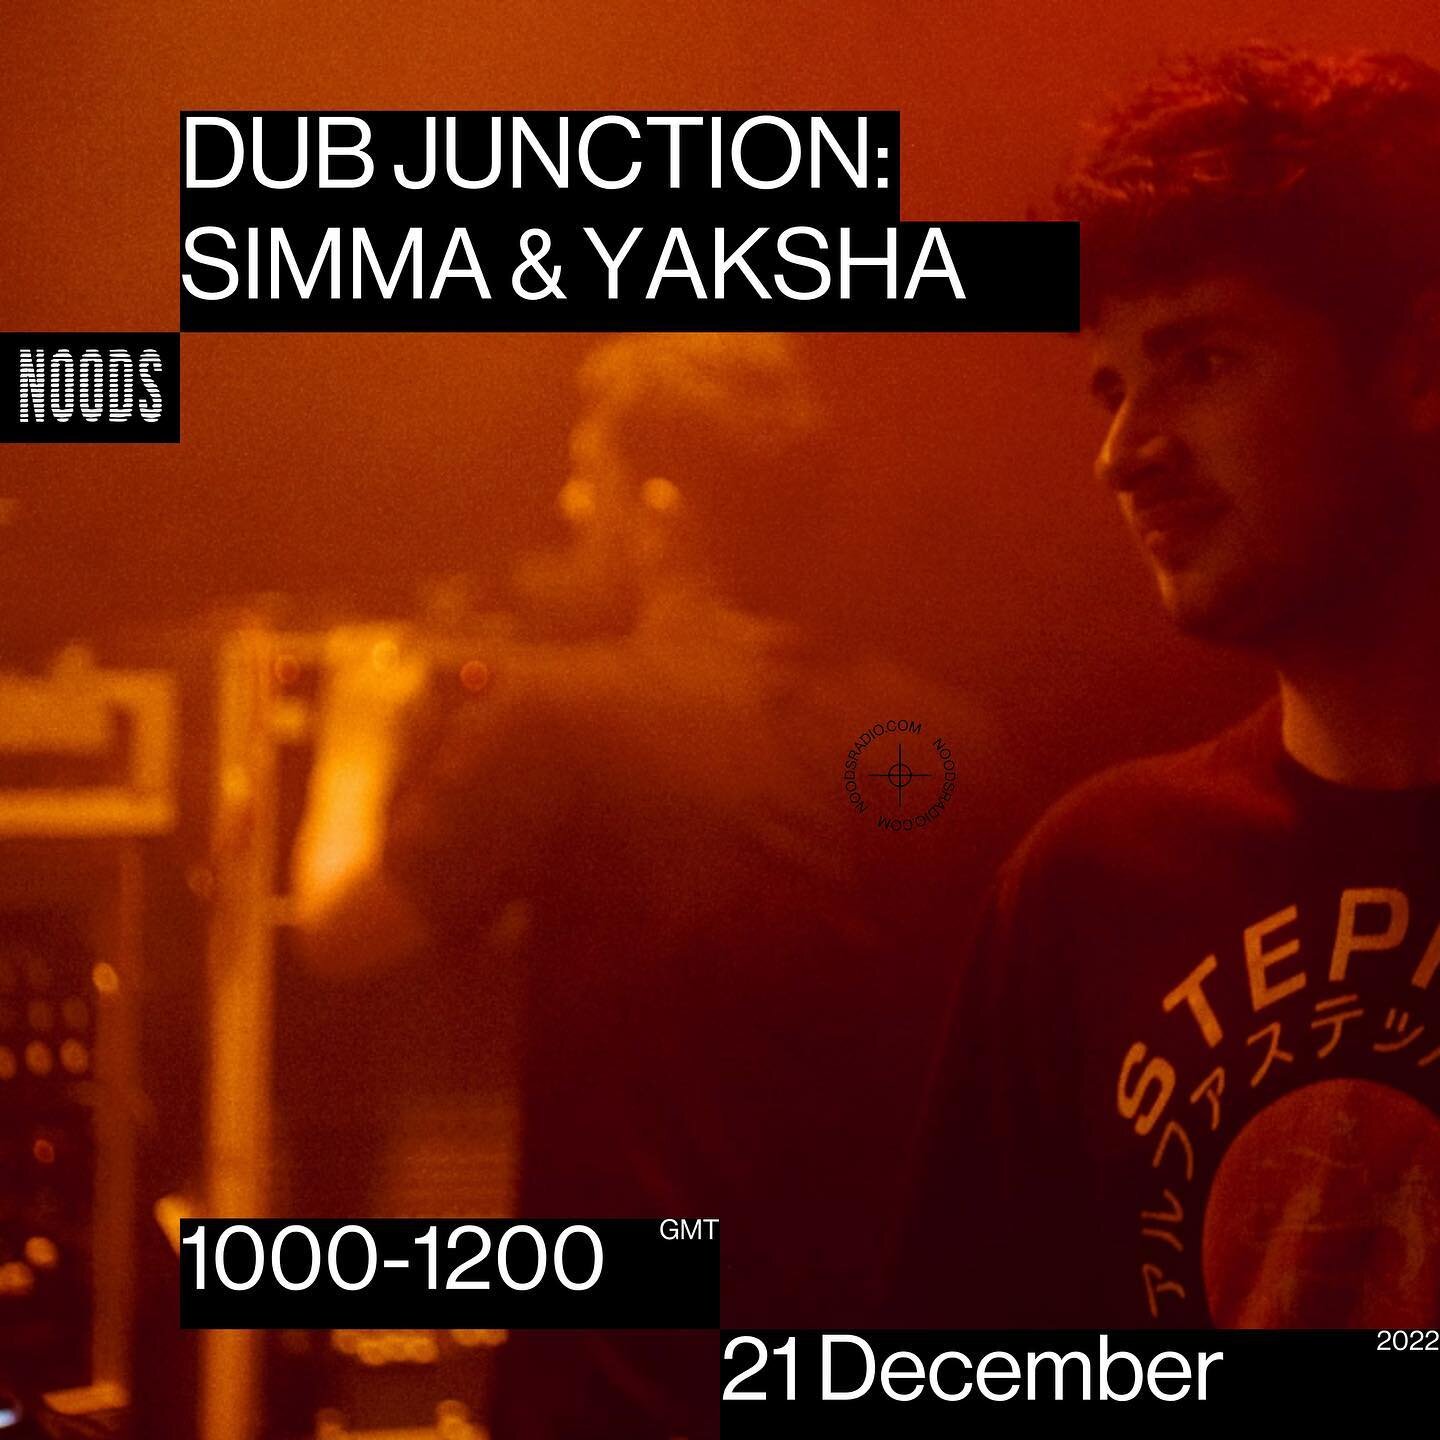 last show of the year on @noodsradio is up to listen back now! Joining @simmadub is @yakshasounds with a special guest mix of his own productions!

Swipe for tracklist + clips, link to all radio shows in bio!

Thank you to everyone that tunes in and 